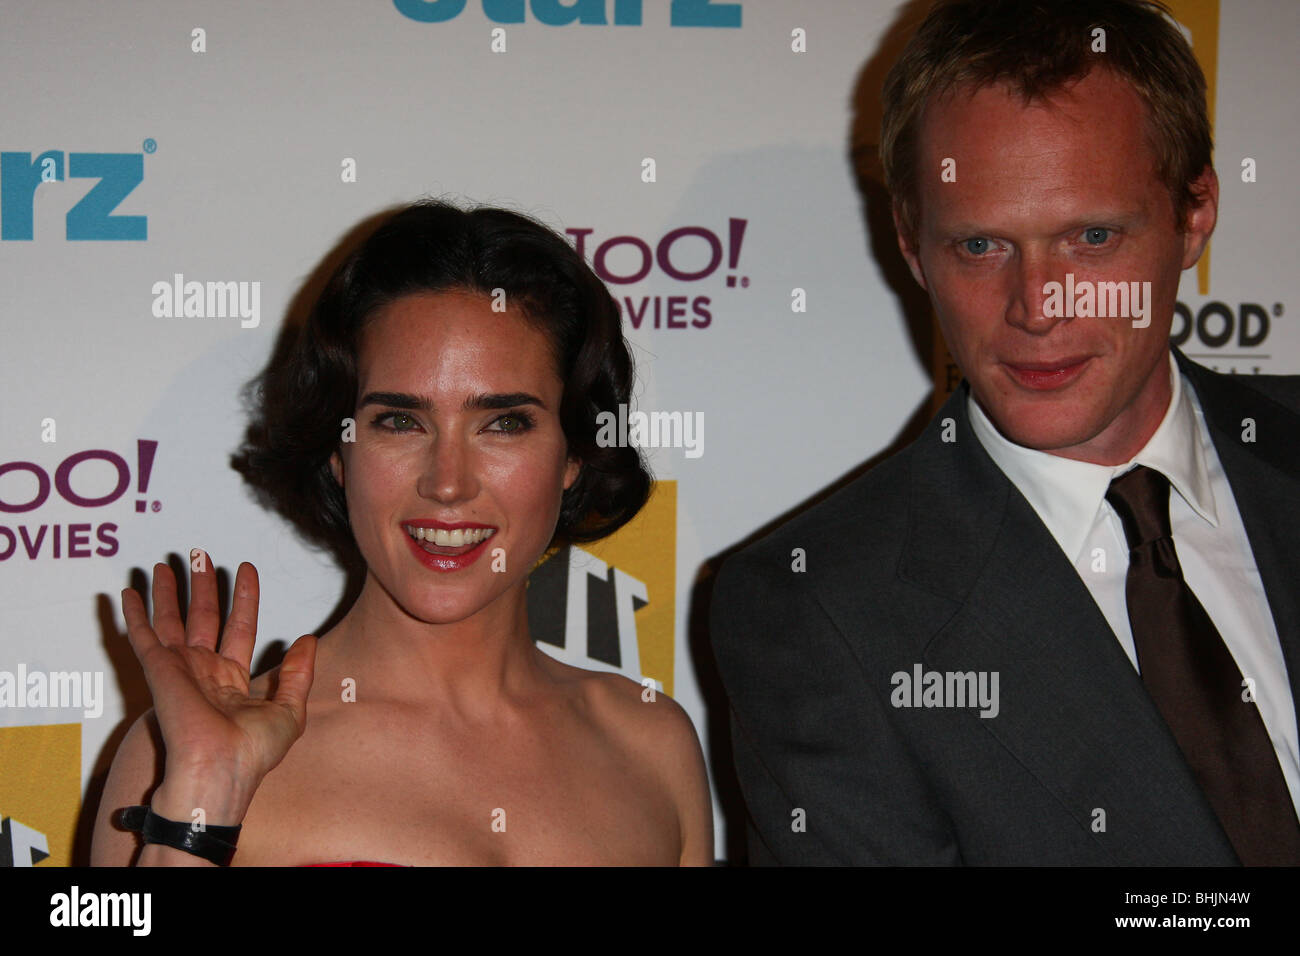 Jennifer Connelly and Paul Bettany Smile on Bike Ride in N.Y.C.: Photo